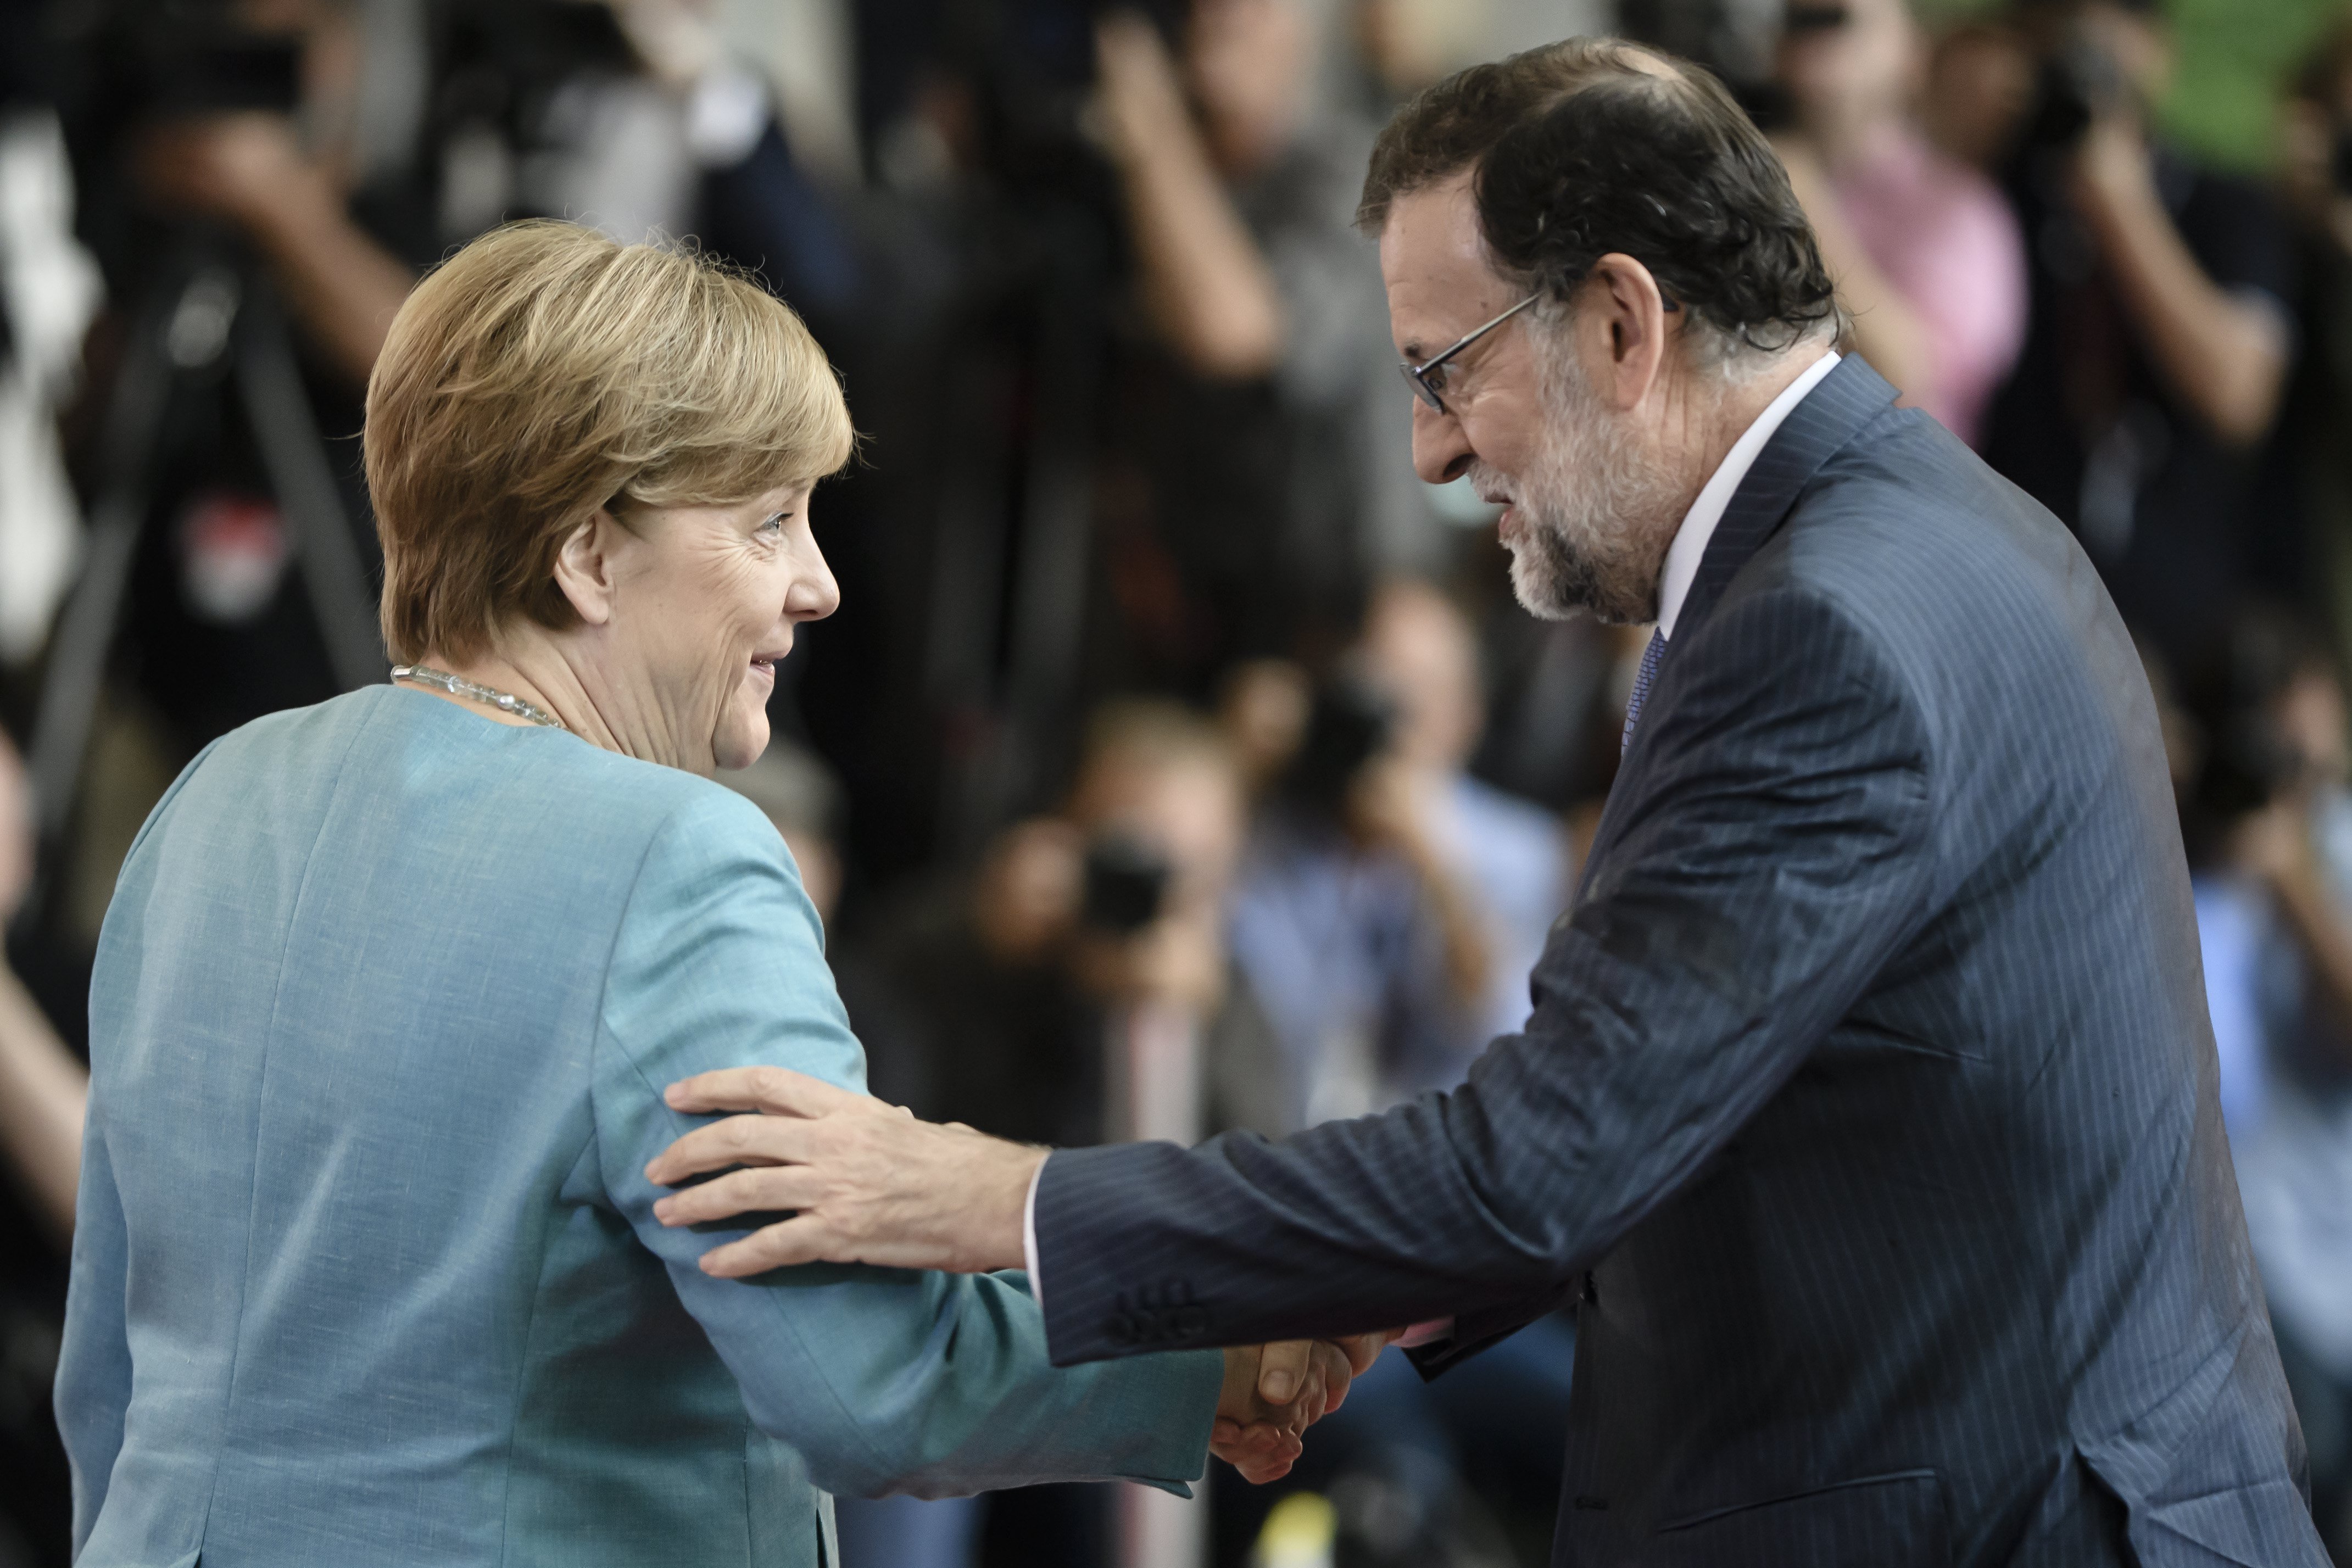 Merkel calls Rajoy asking for explanations, other European leaders start to comment